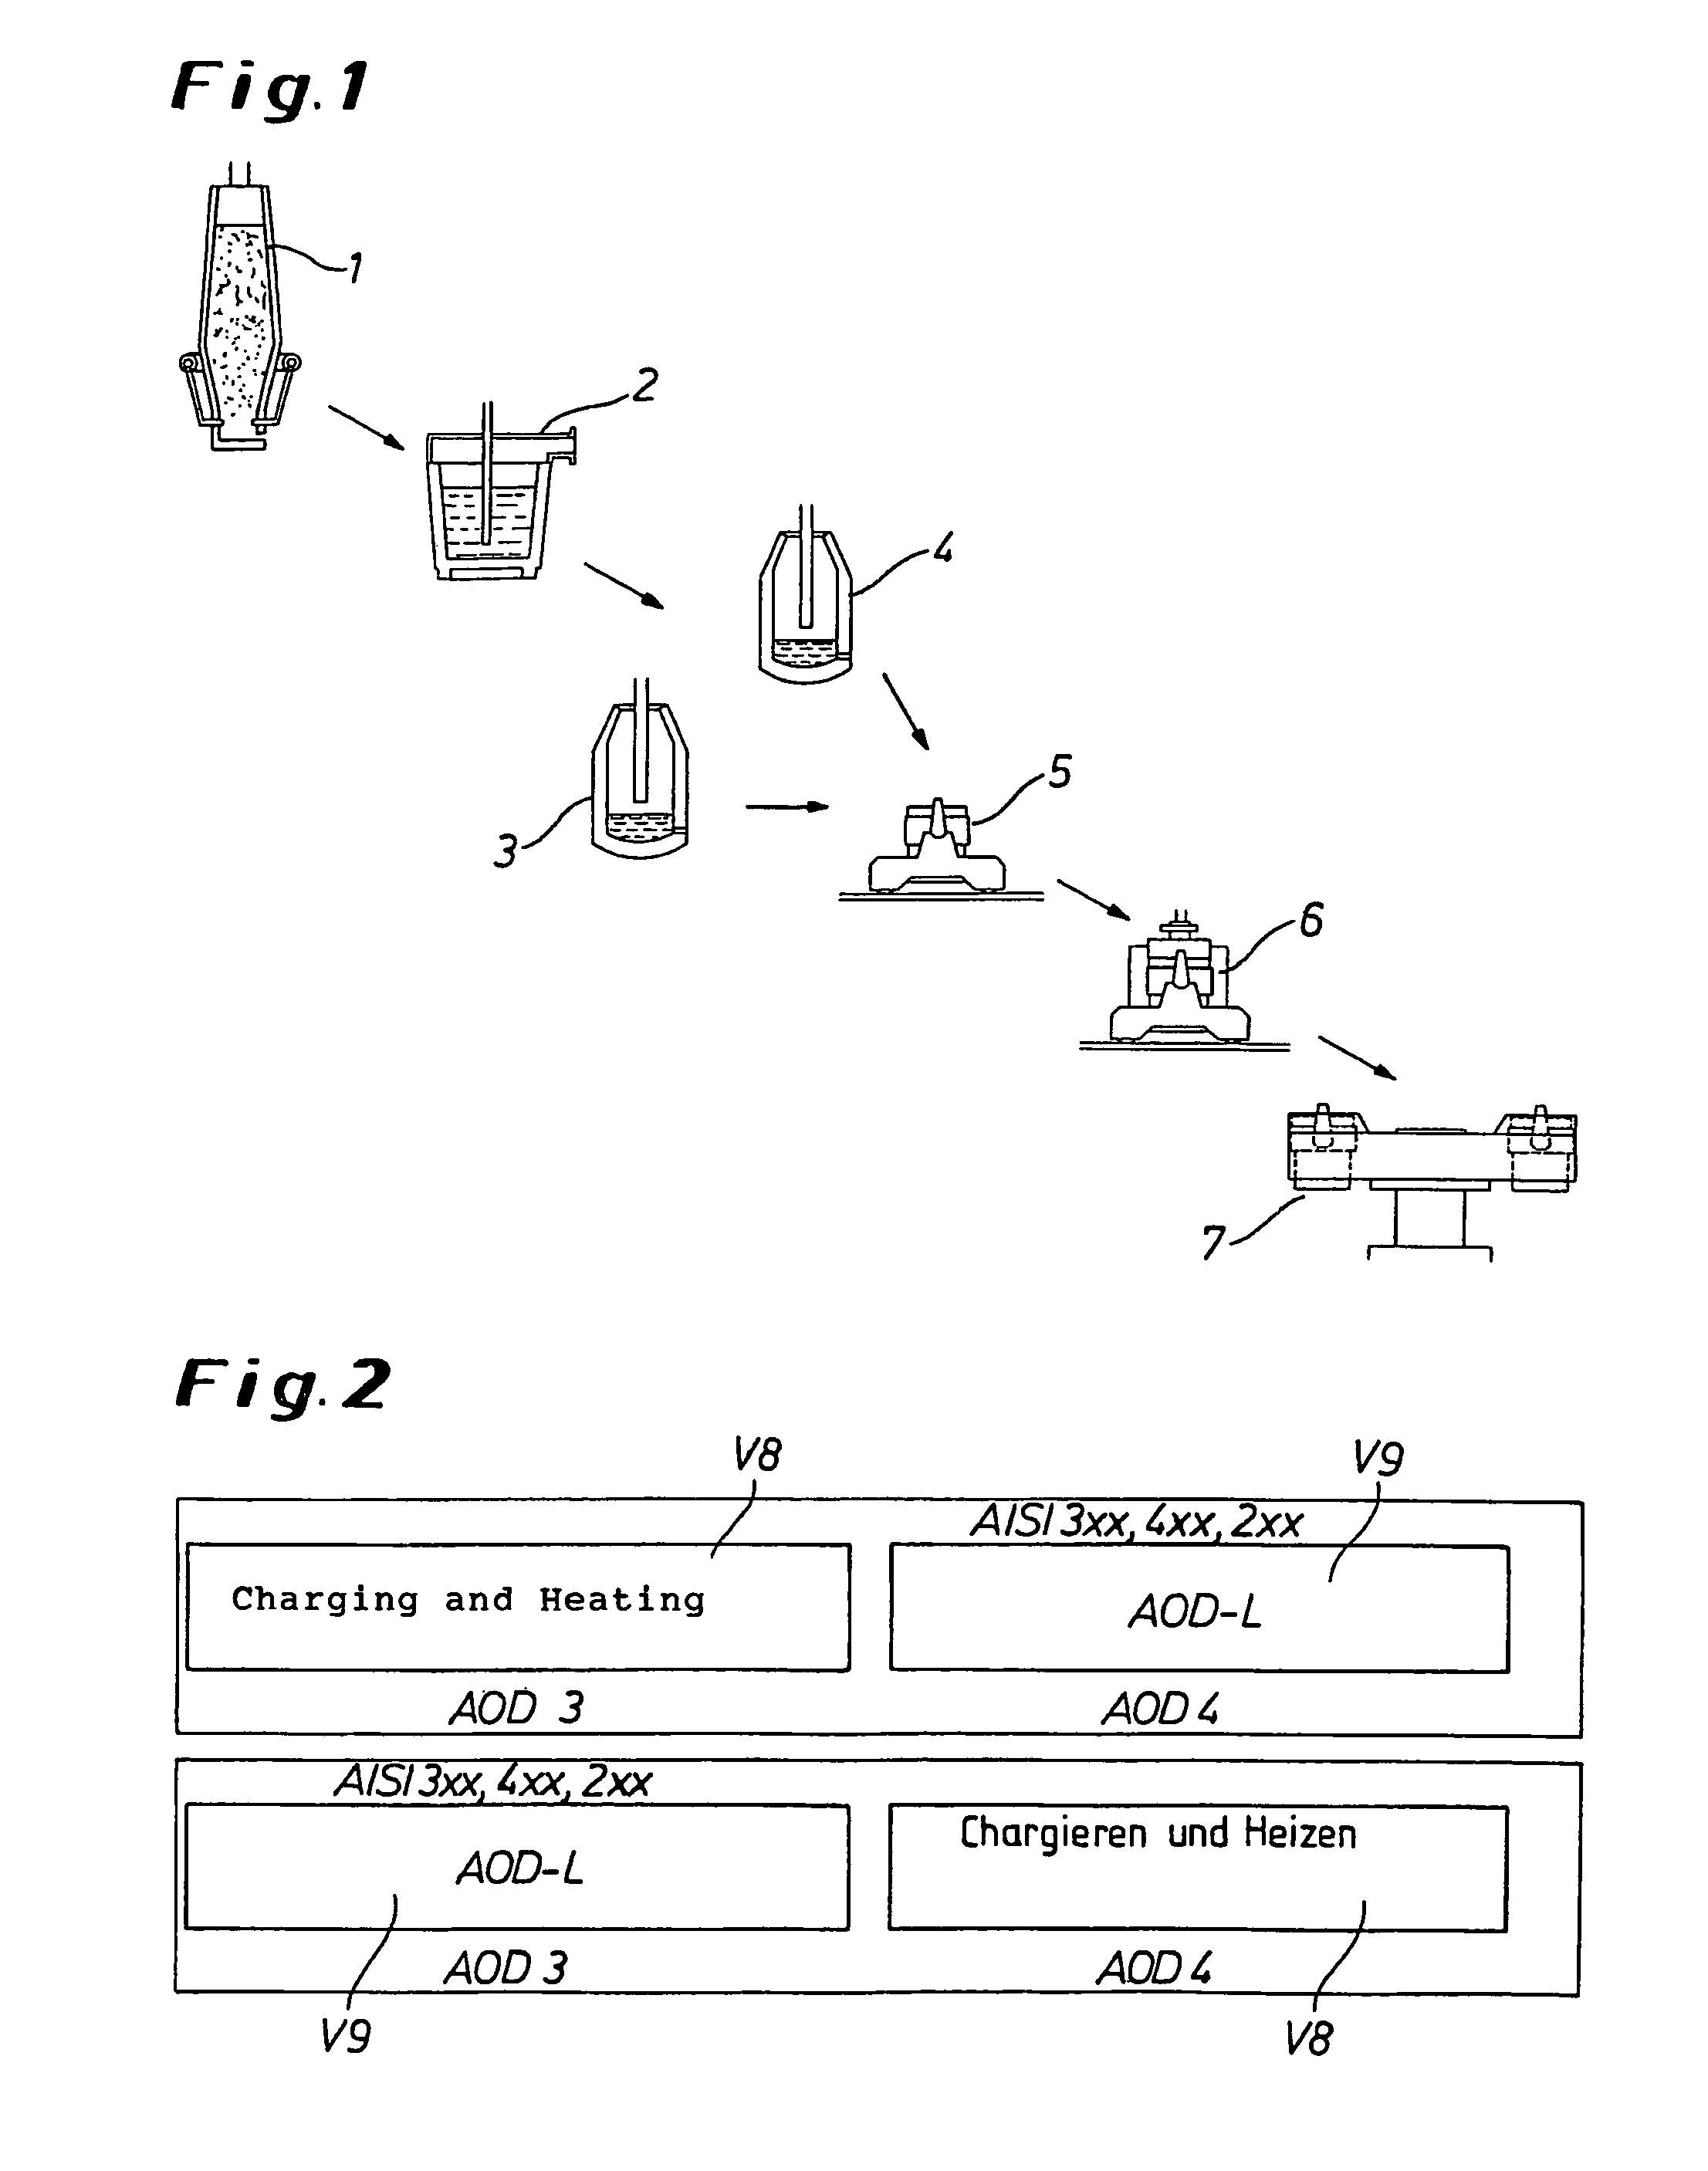 Method and device for producing stainless steel without using a supply of electrical energy, based on pig-iron that has been pre-treated in a DDD installation